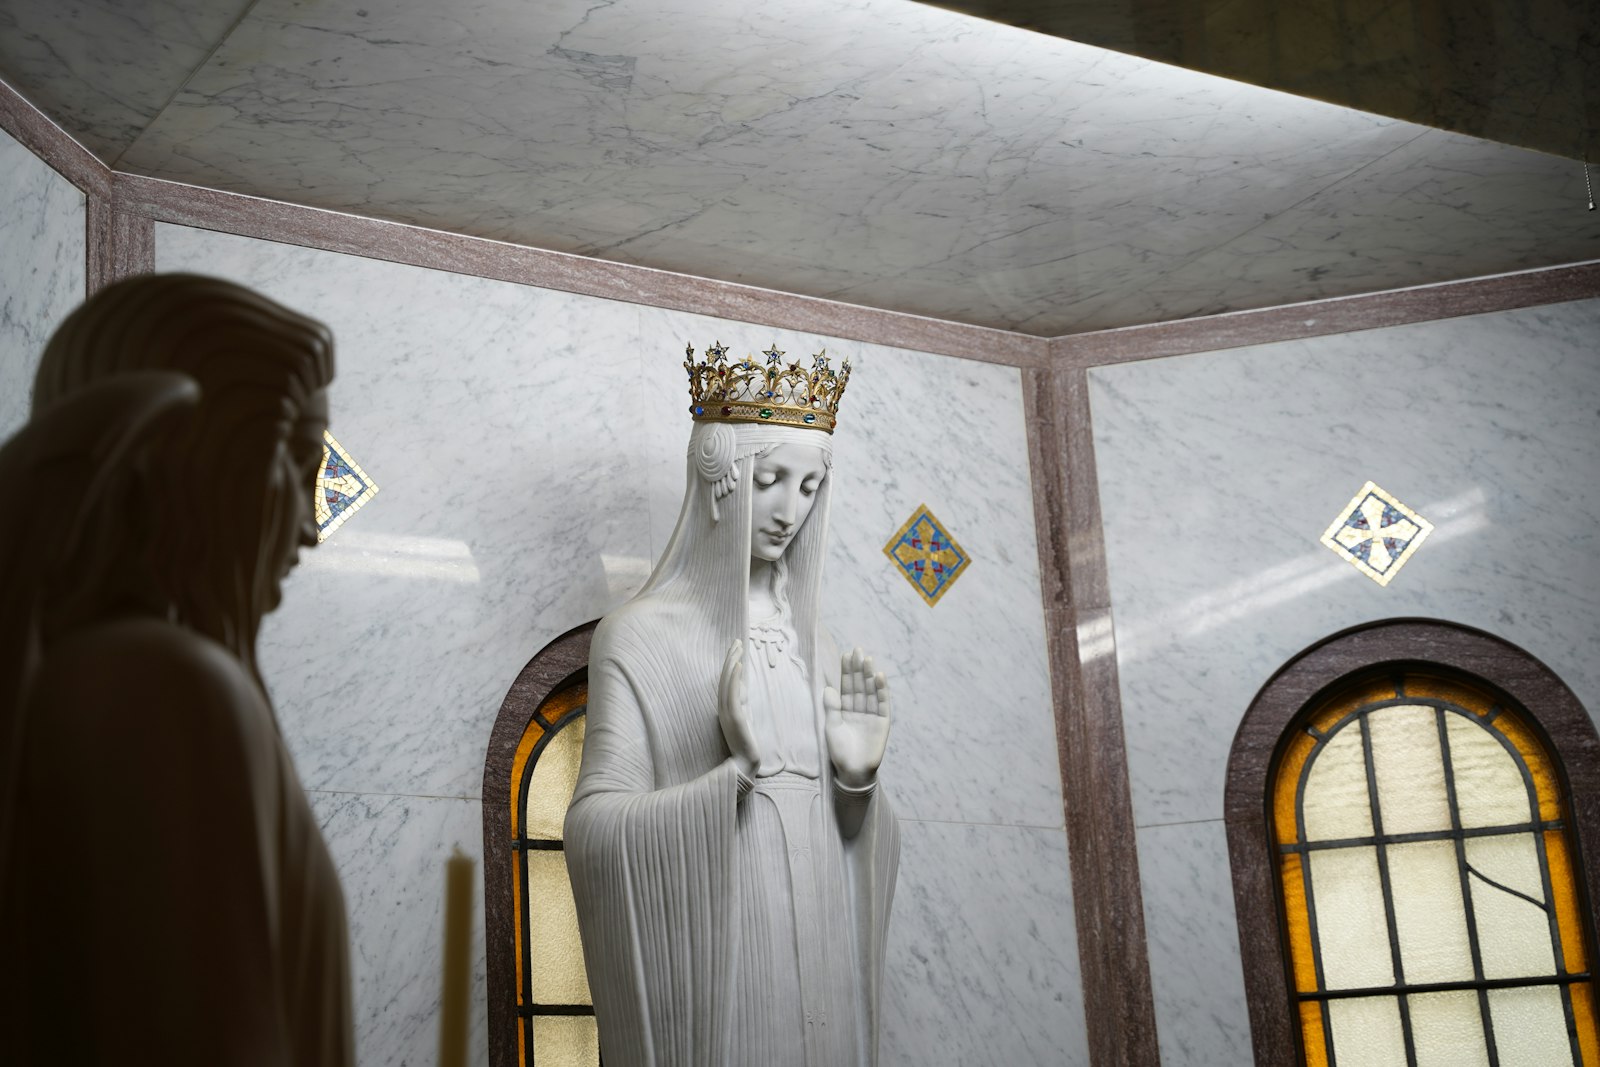 The statue was placed in a niche in the church where a confessional used to be, along with stands displaying news articles chronicling Immaculate Conception’s history, a reminder of what was lost and what has been saved. “The statue meant a lot to parishioners who came in here and adopted St. Hyacinth as their new home after Immaculate Conception was torn down,” Kraus said. “It is only out of fairness and respect toward them that we restore her to her original beauty.”